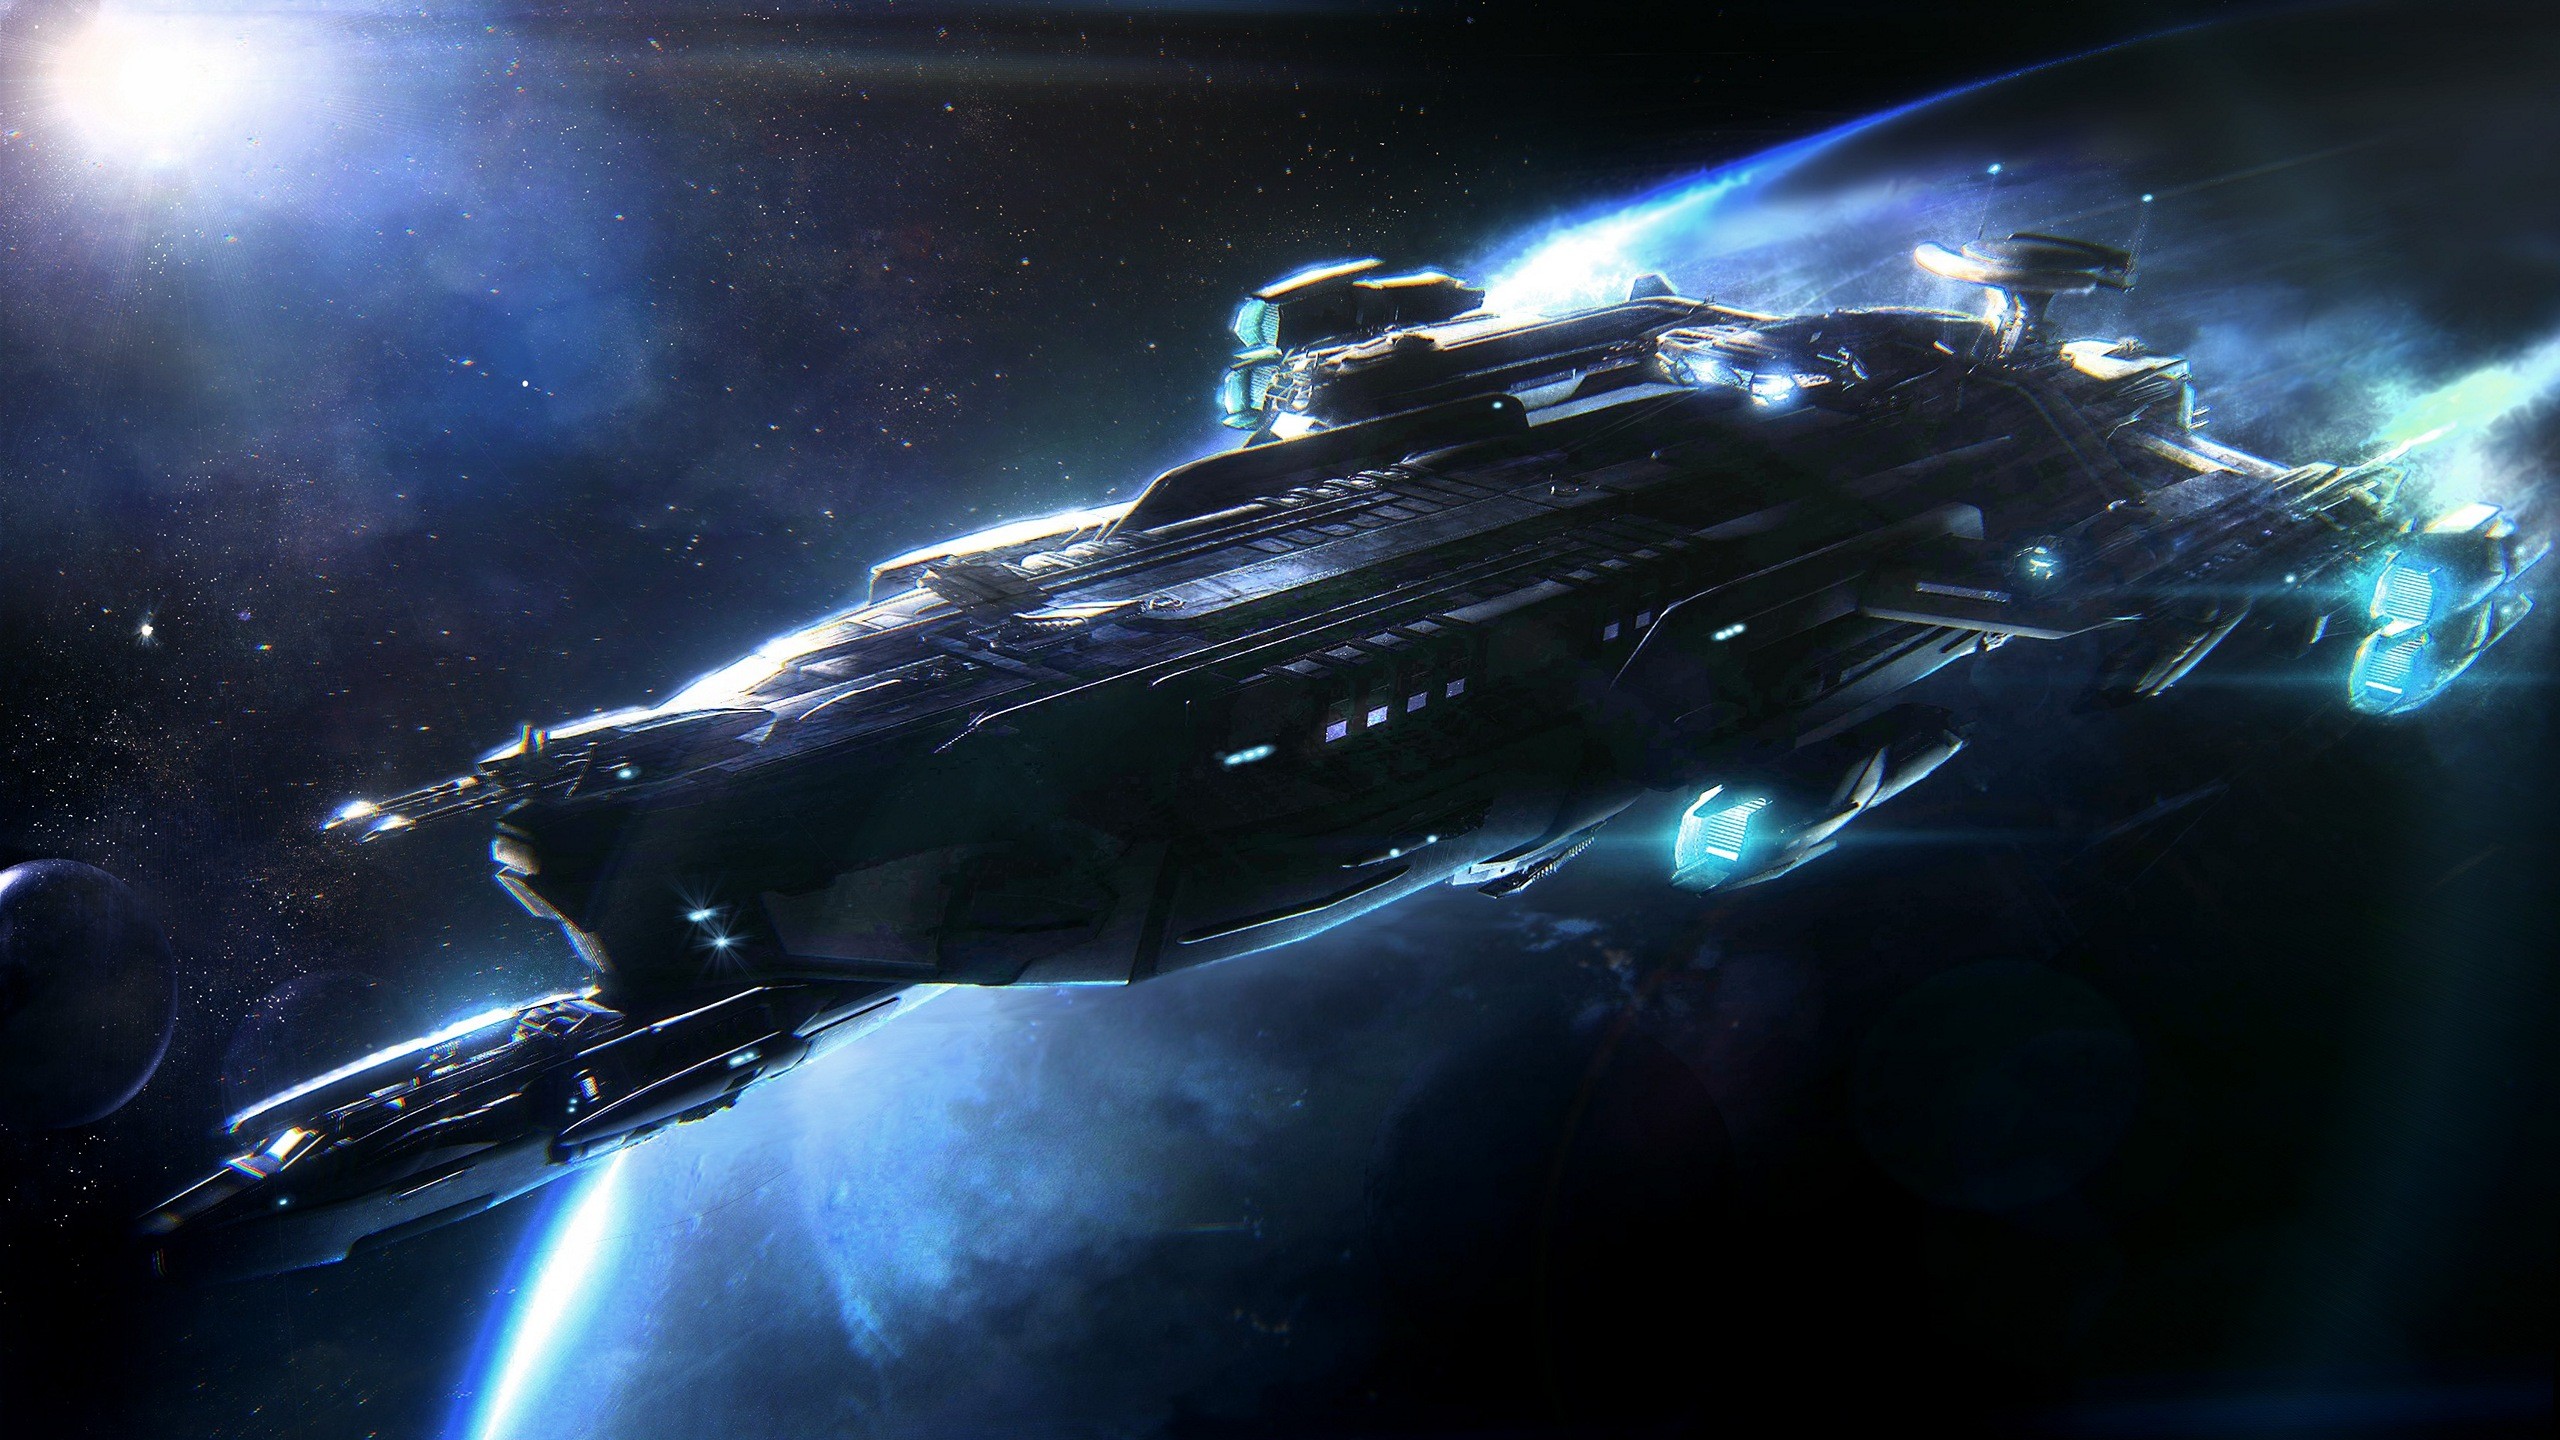 General 2560x1440 Star Citizen Idris science fiction spaceship video games PC gaming video game art vehicle space art space